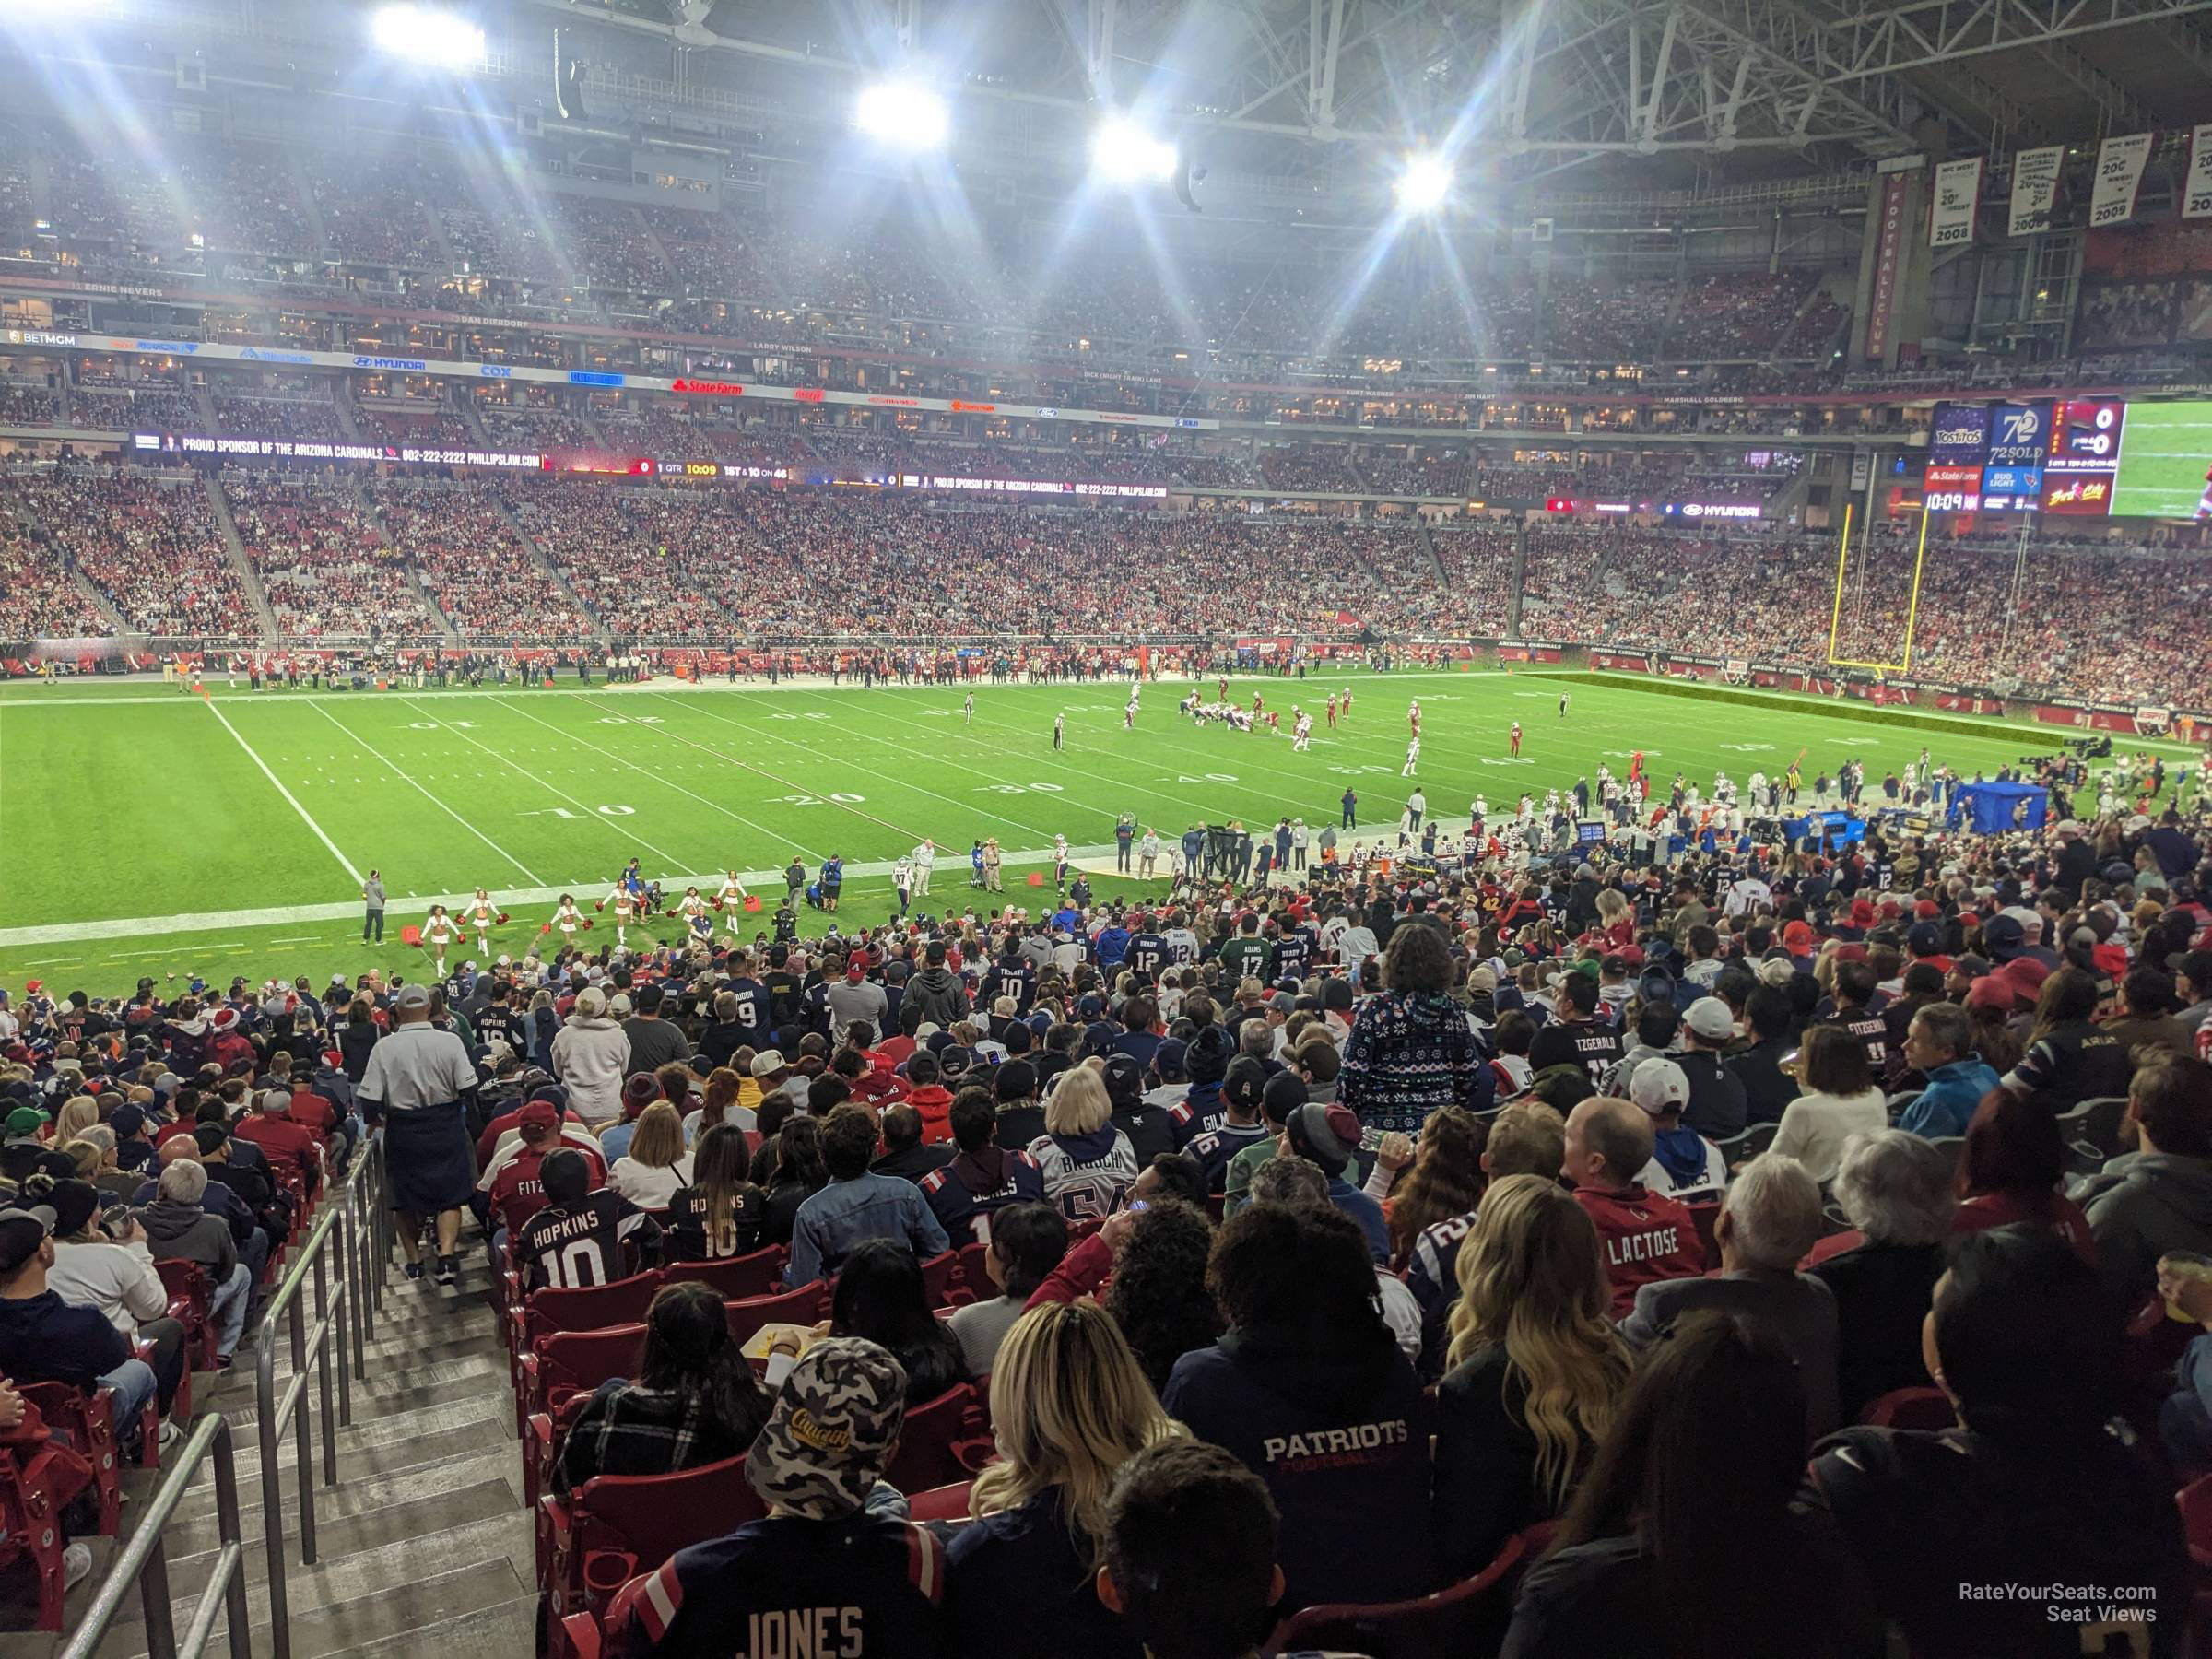 section 134, row 41 seat view  for football - state farm stadium